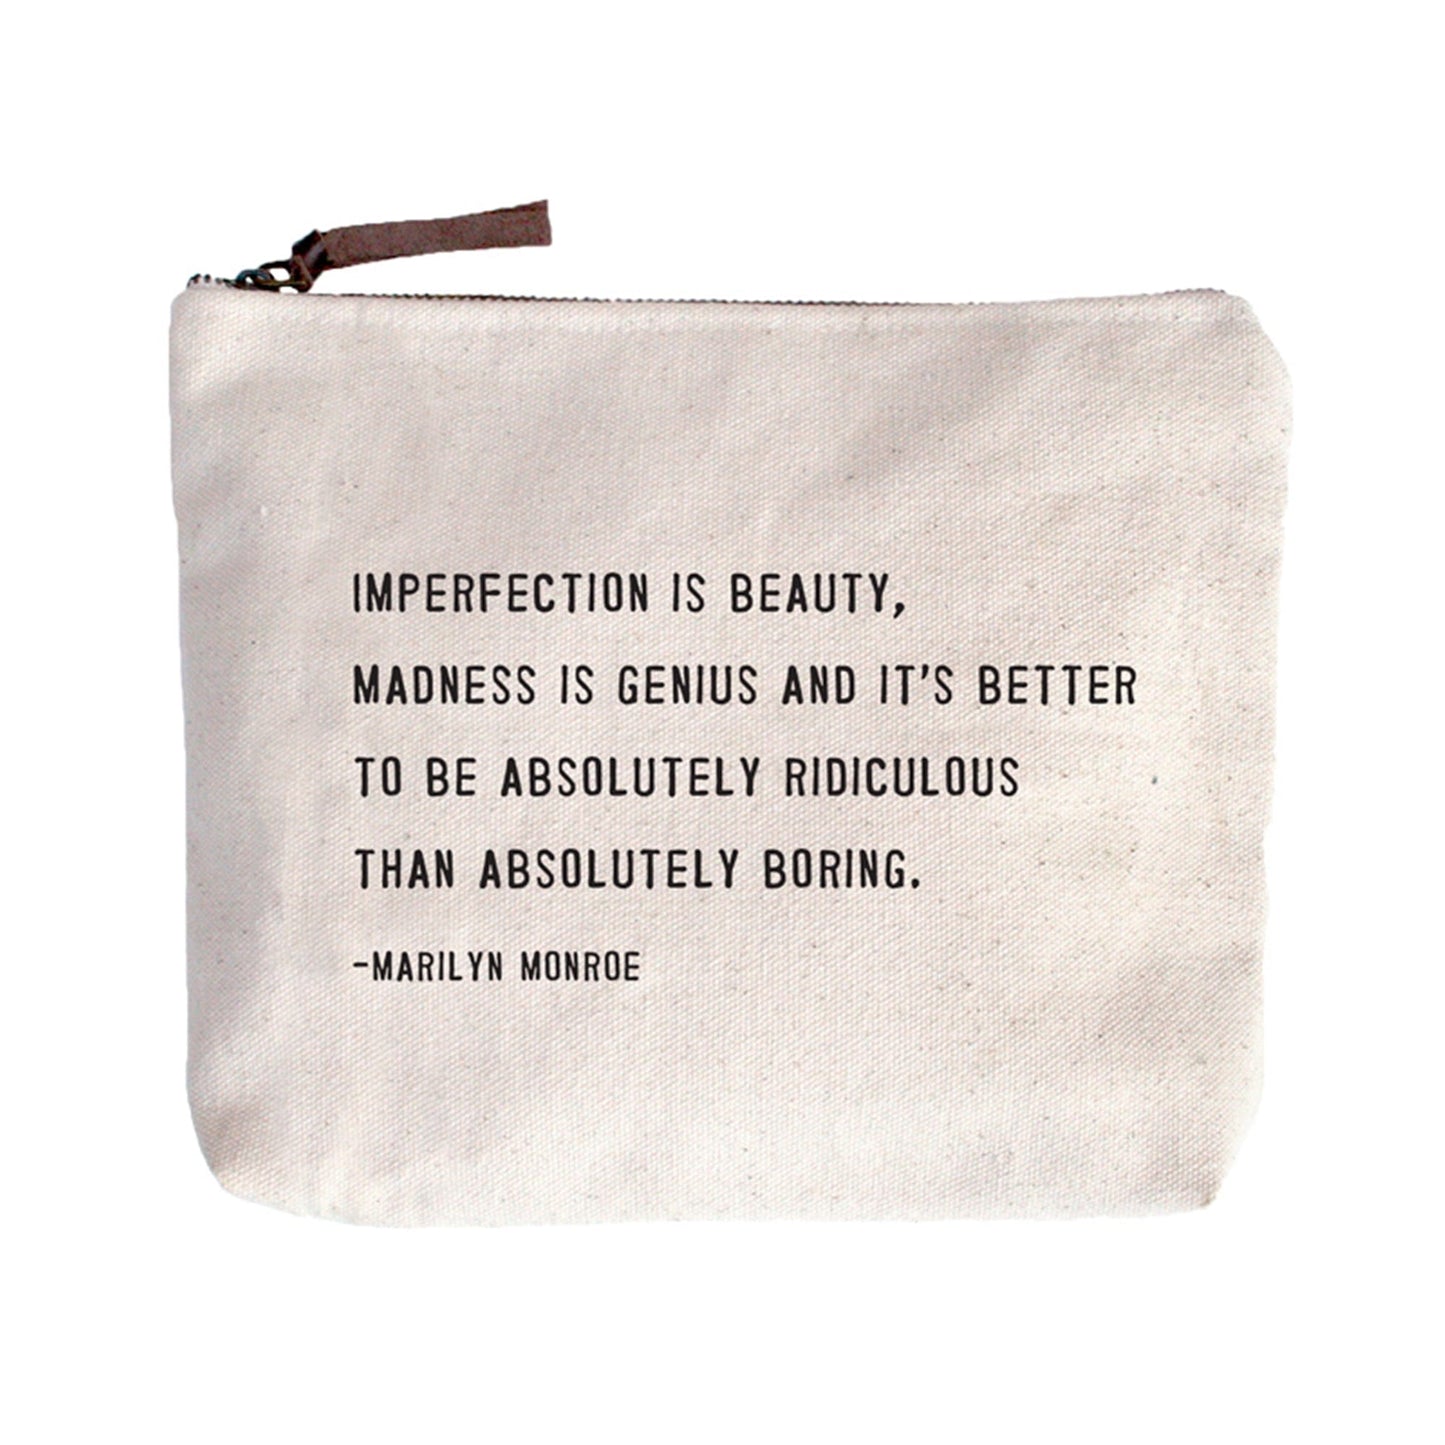 BAG Marilyn Monroe "Imperfection Is Beauty..." Canvas Bag